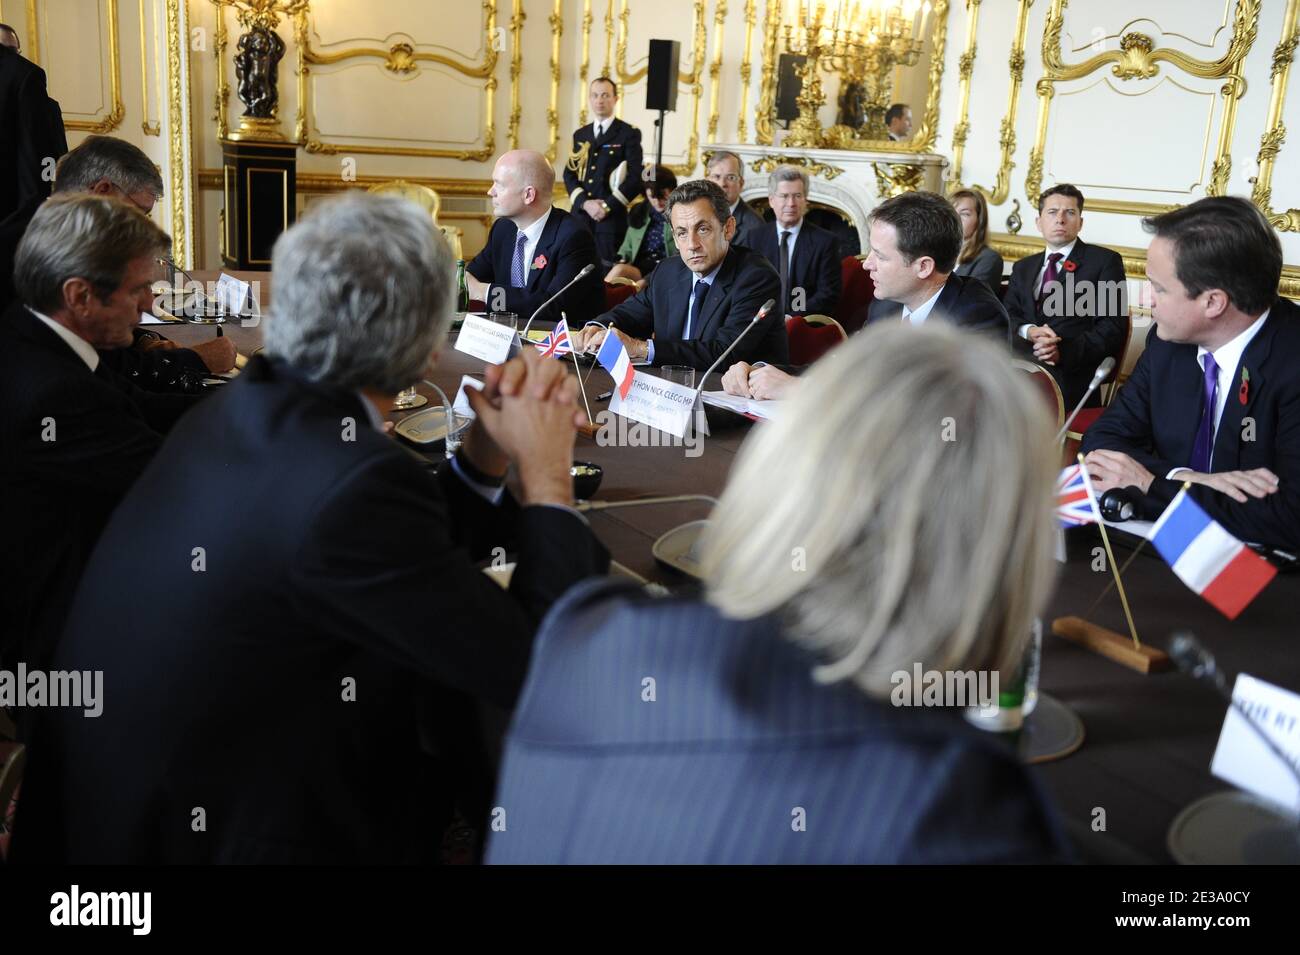 French President Nicolas Sarkozy, British Deputy Prime Minister Nick Clegg and British Prime Minister David Cameron are pictured during an Franco-British Summit, at Lancaster House in London, UK on November 2, 2010. David Cameron and Nicolas Sarkozy are likely to sign far-reaching treaties which will commit their forces to operating together for decades to come. Photo by Elodie Gregoire/ABACAPRESS.COM Stock Photo